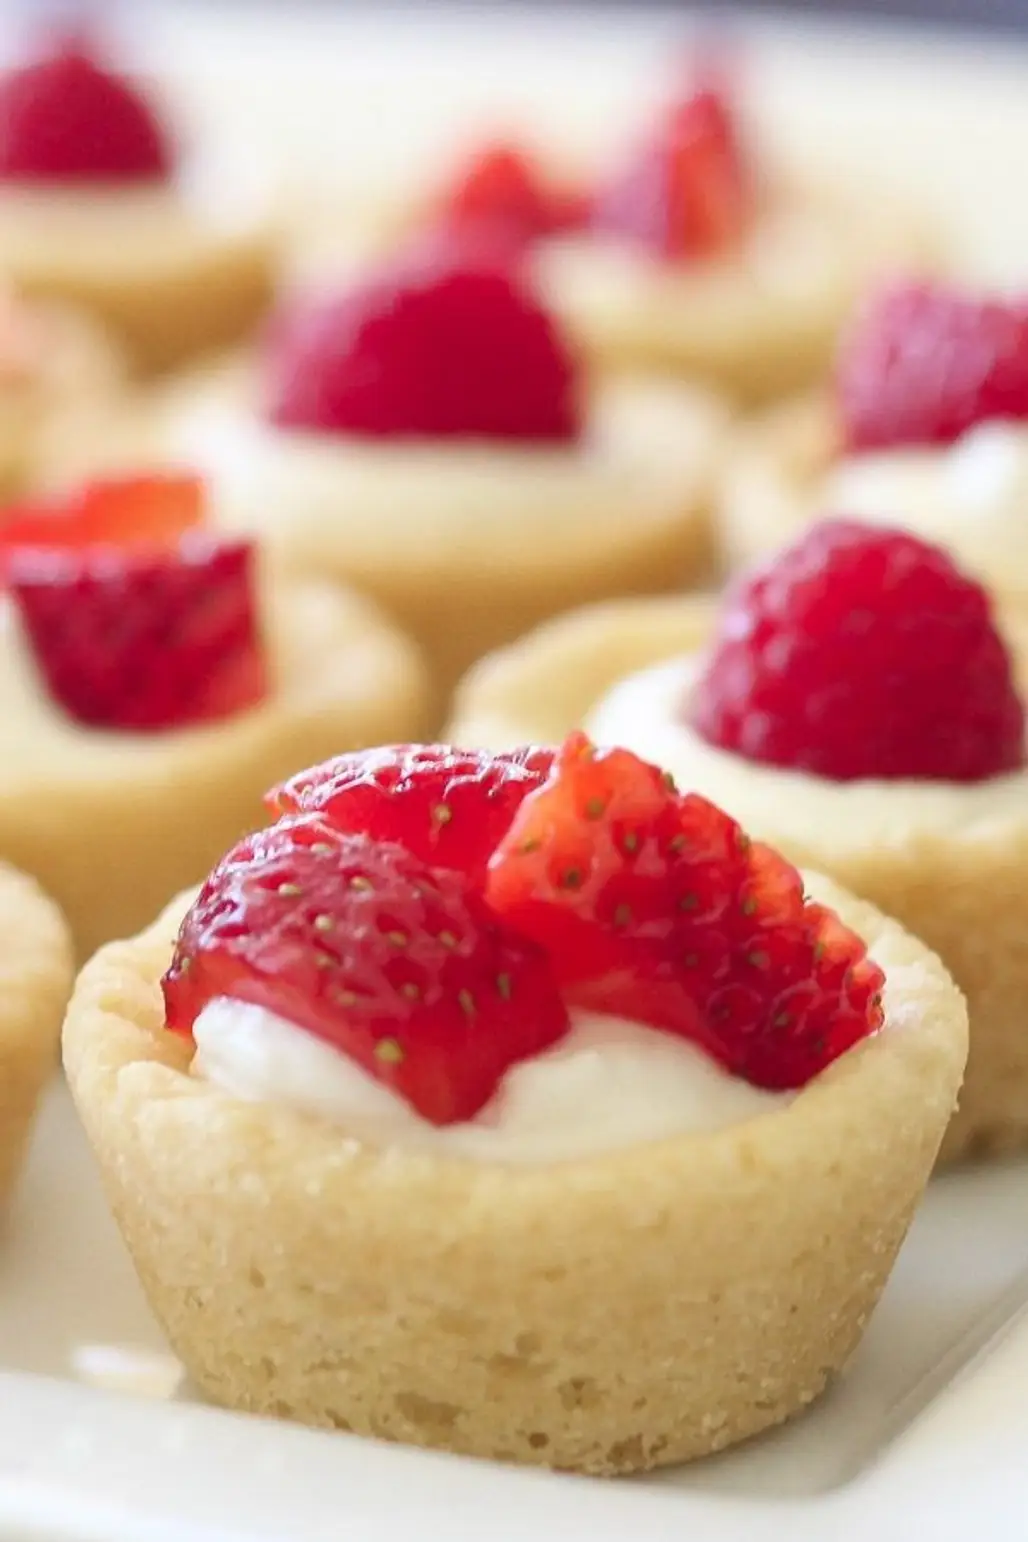 Sugar Cookie Tarts Filled with Sweetened Cream Cheese and Topped with Berries